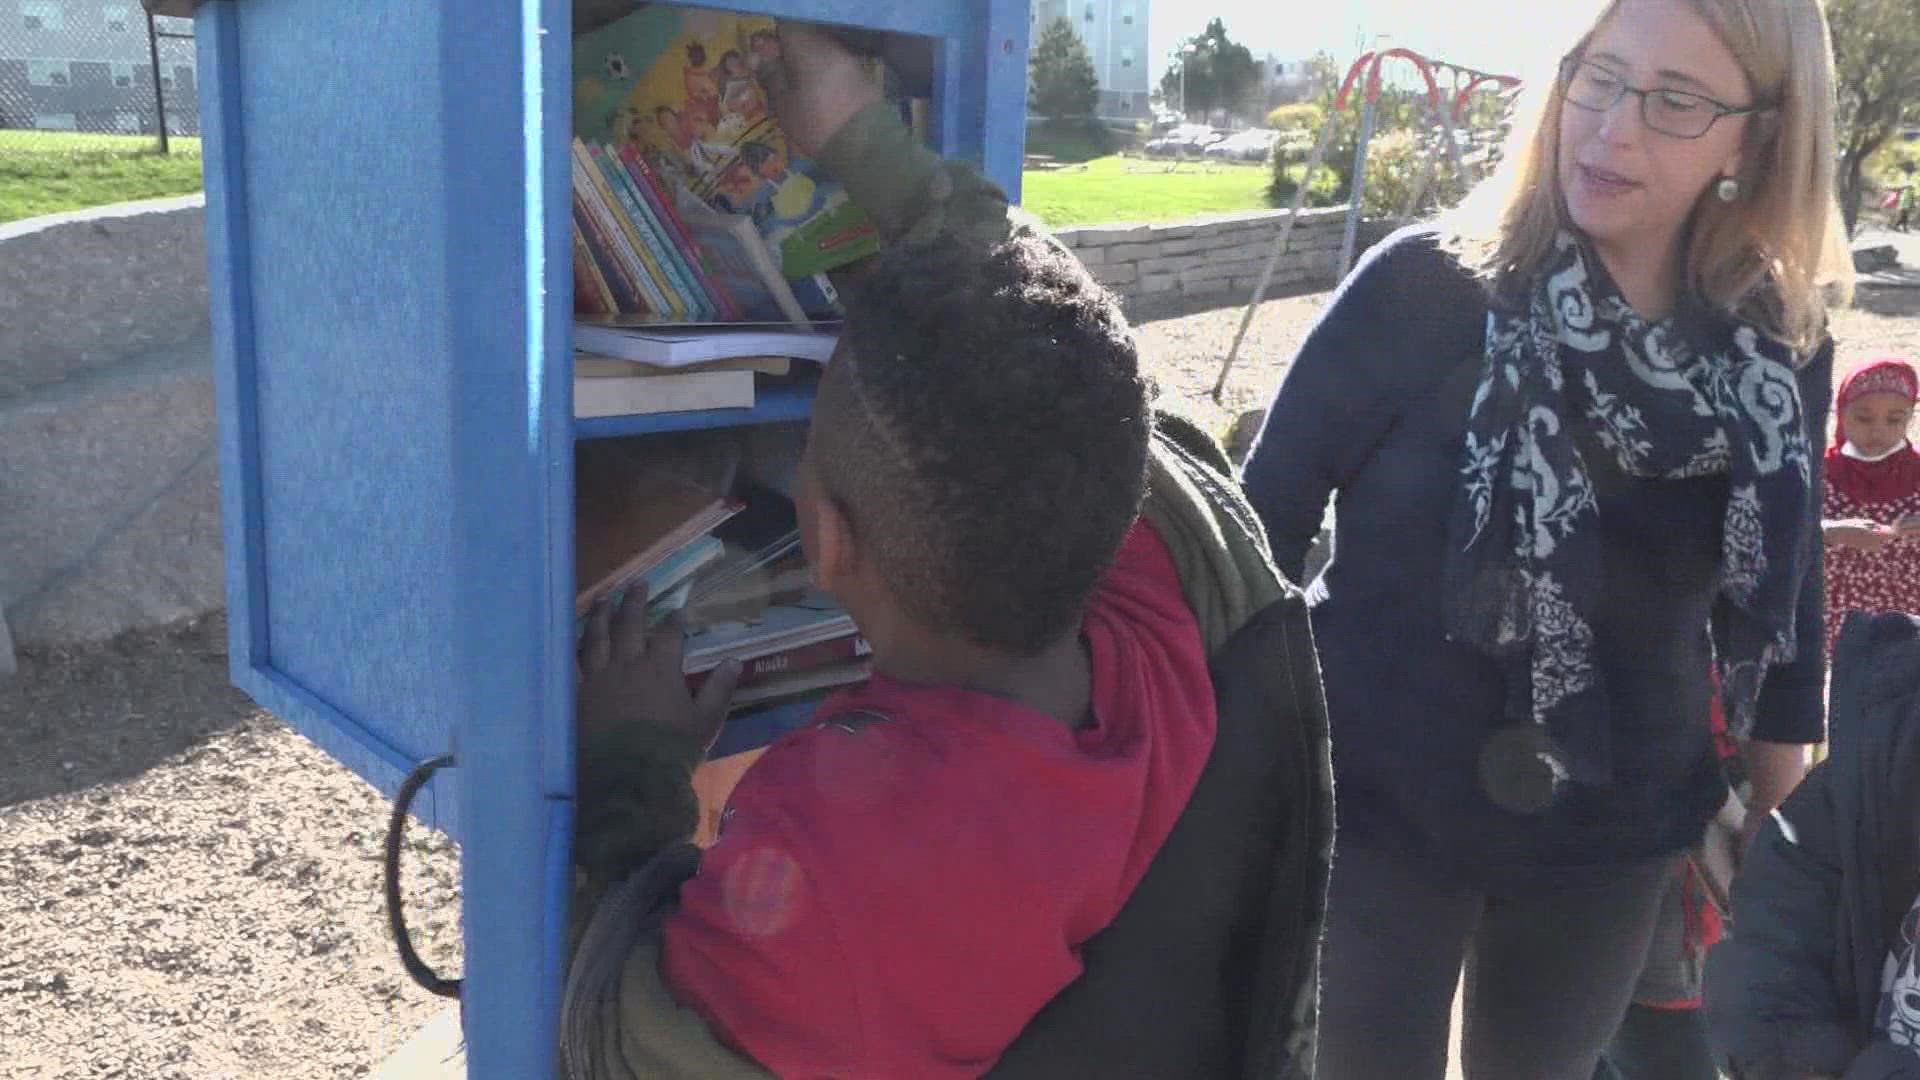 Students at East End Community School in Portland can now spend their recess time borrowing books from the school's new “Little Free Library.”